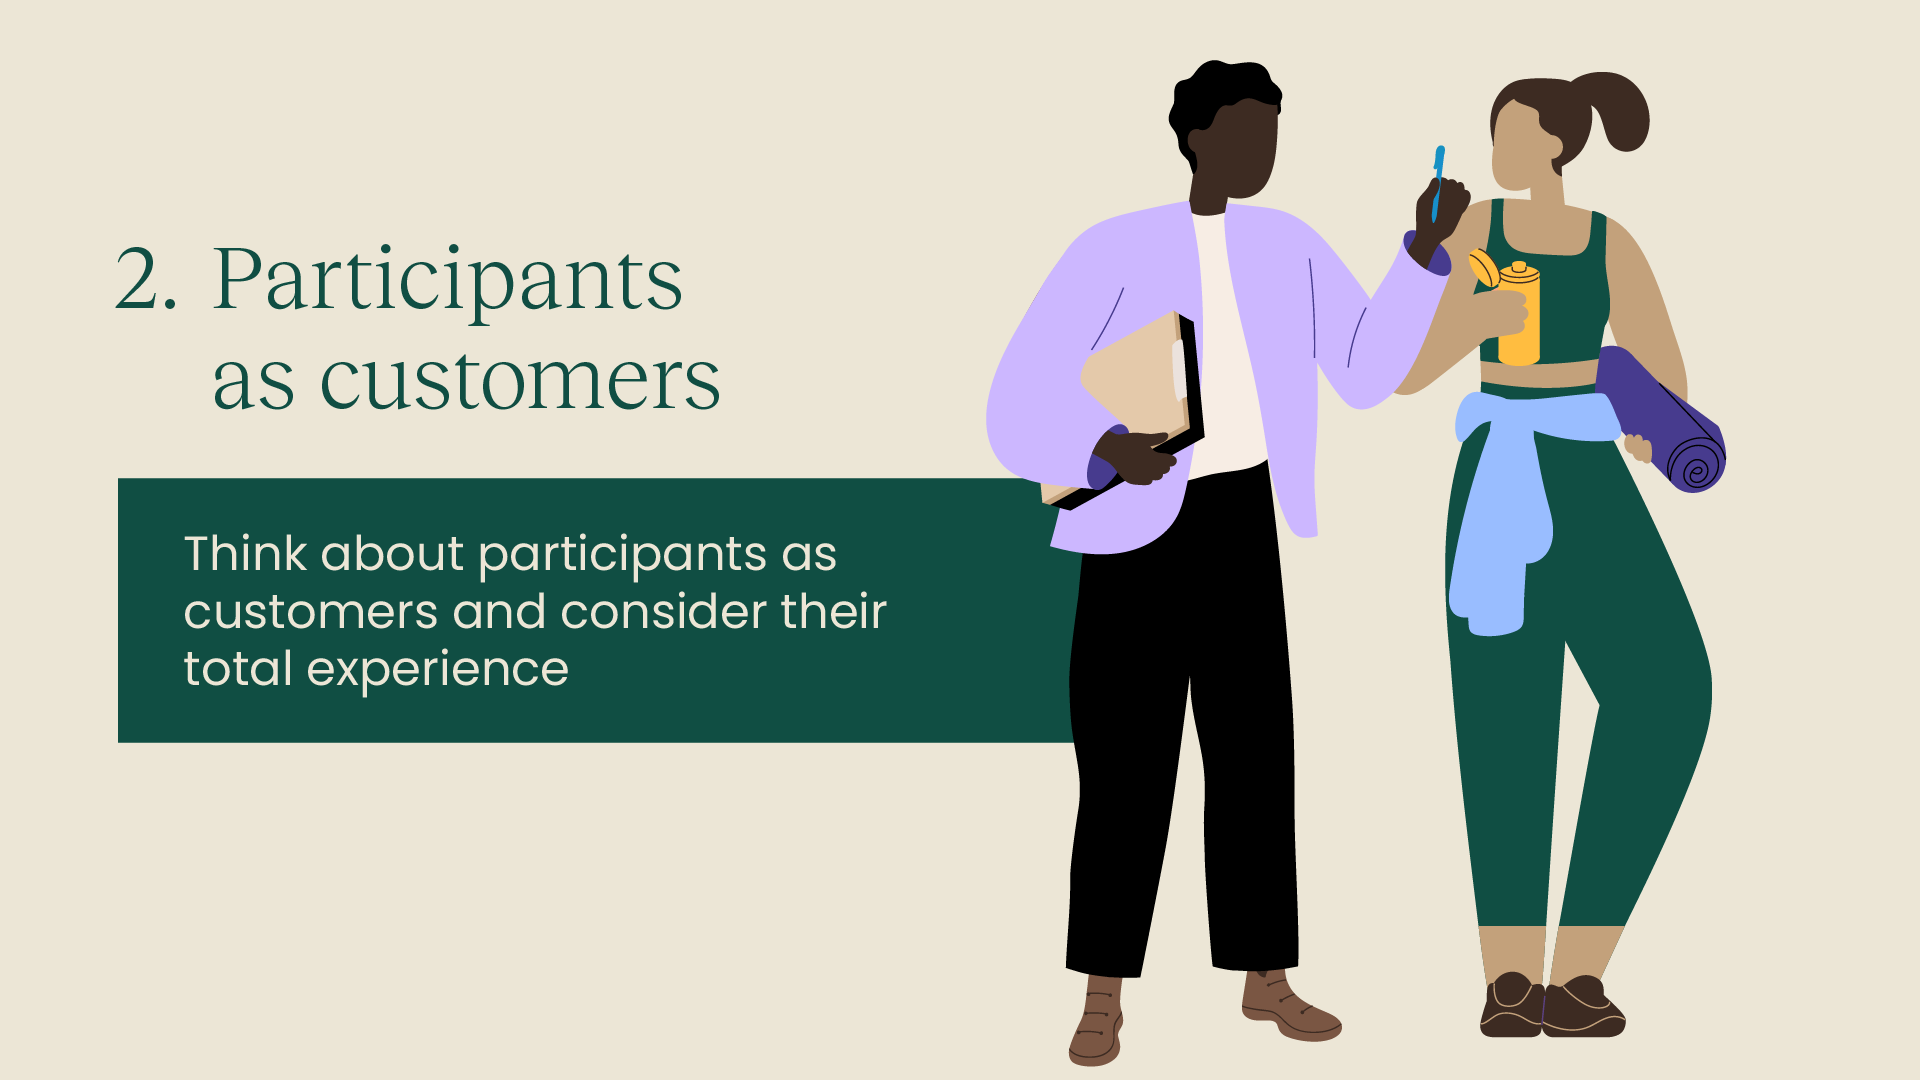 2. Participants as customers: Think about participants as customers and consider their total experience